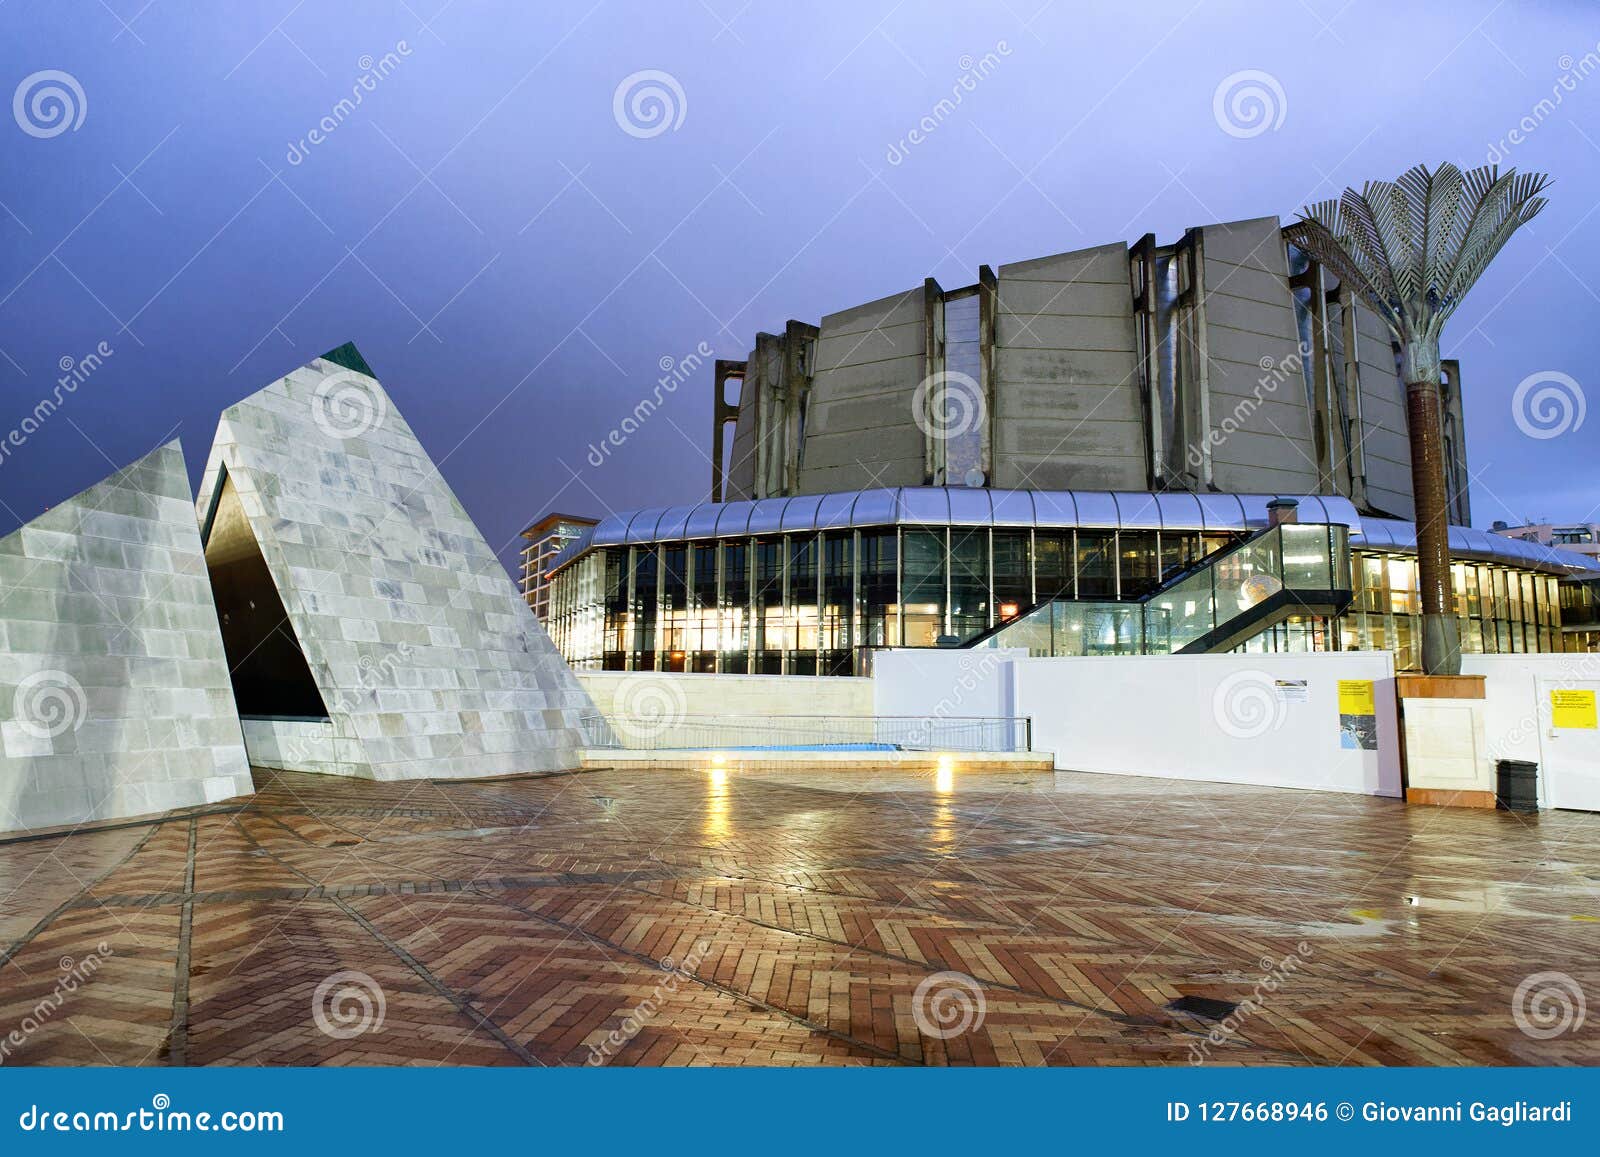 wellington, new zealand - september 4, 2018: museum of new zealand te papa tongarewa at night. this is the national museum and ar